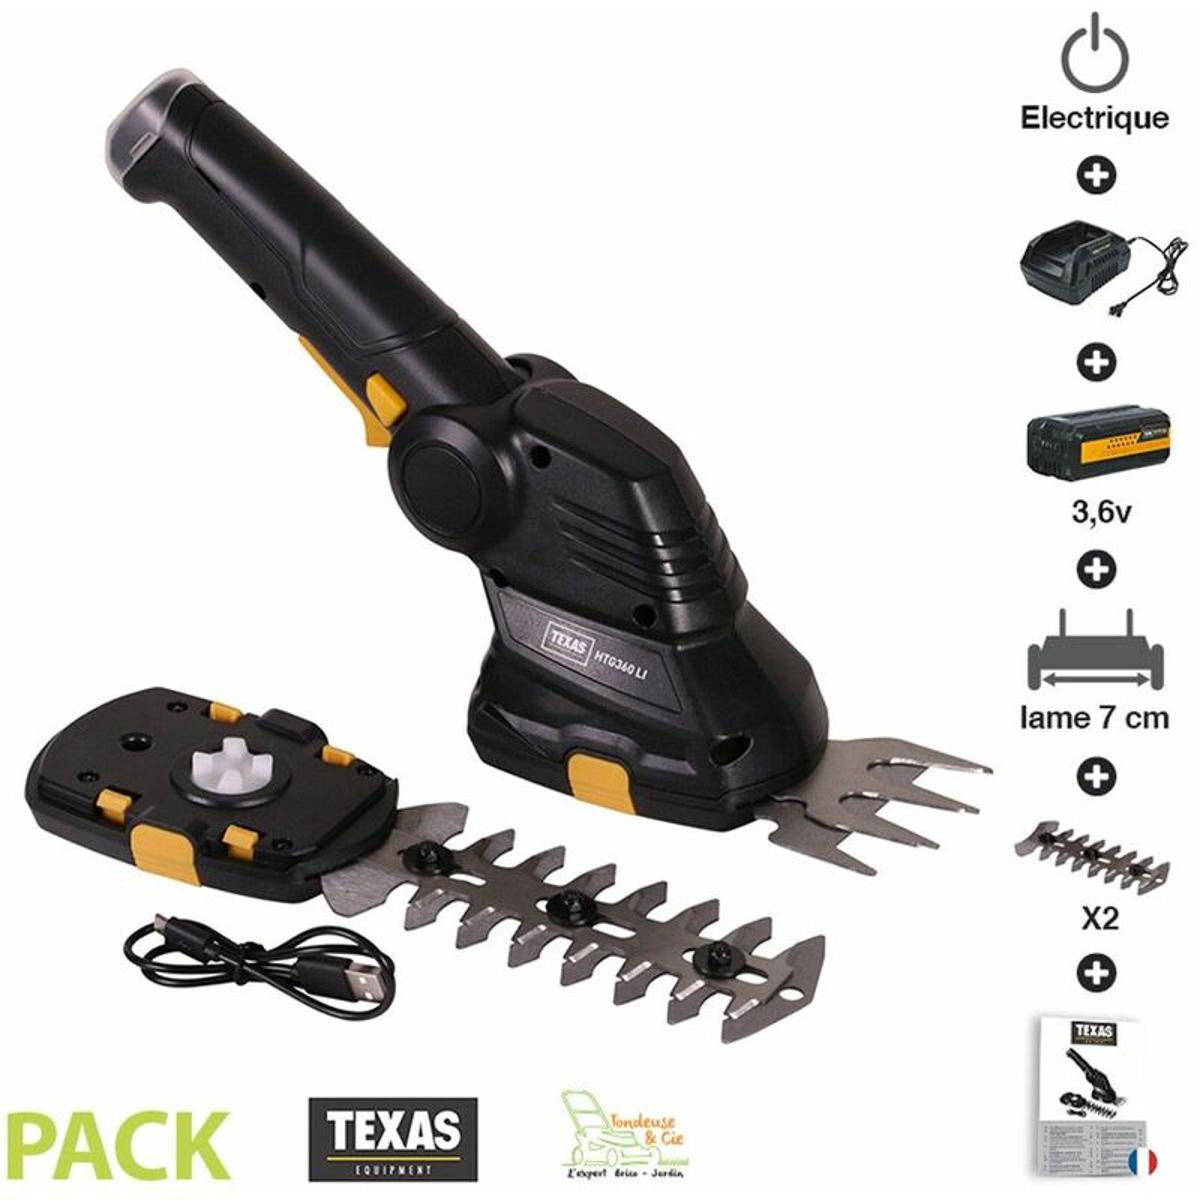 TACK Life Grass Trimmer Texas HTG360Li Battery 2in1 hedge trimmer